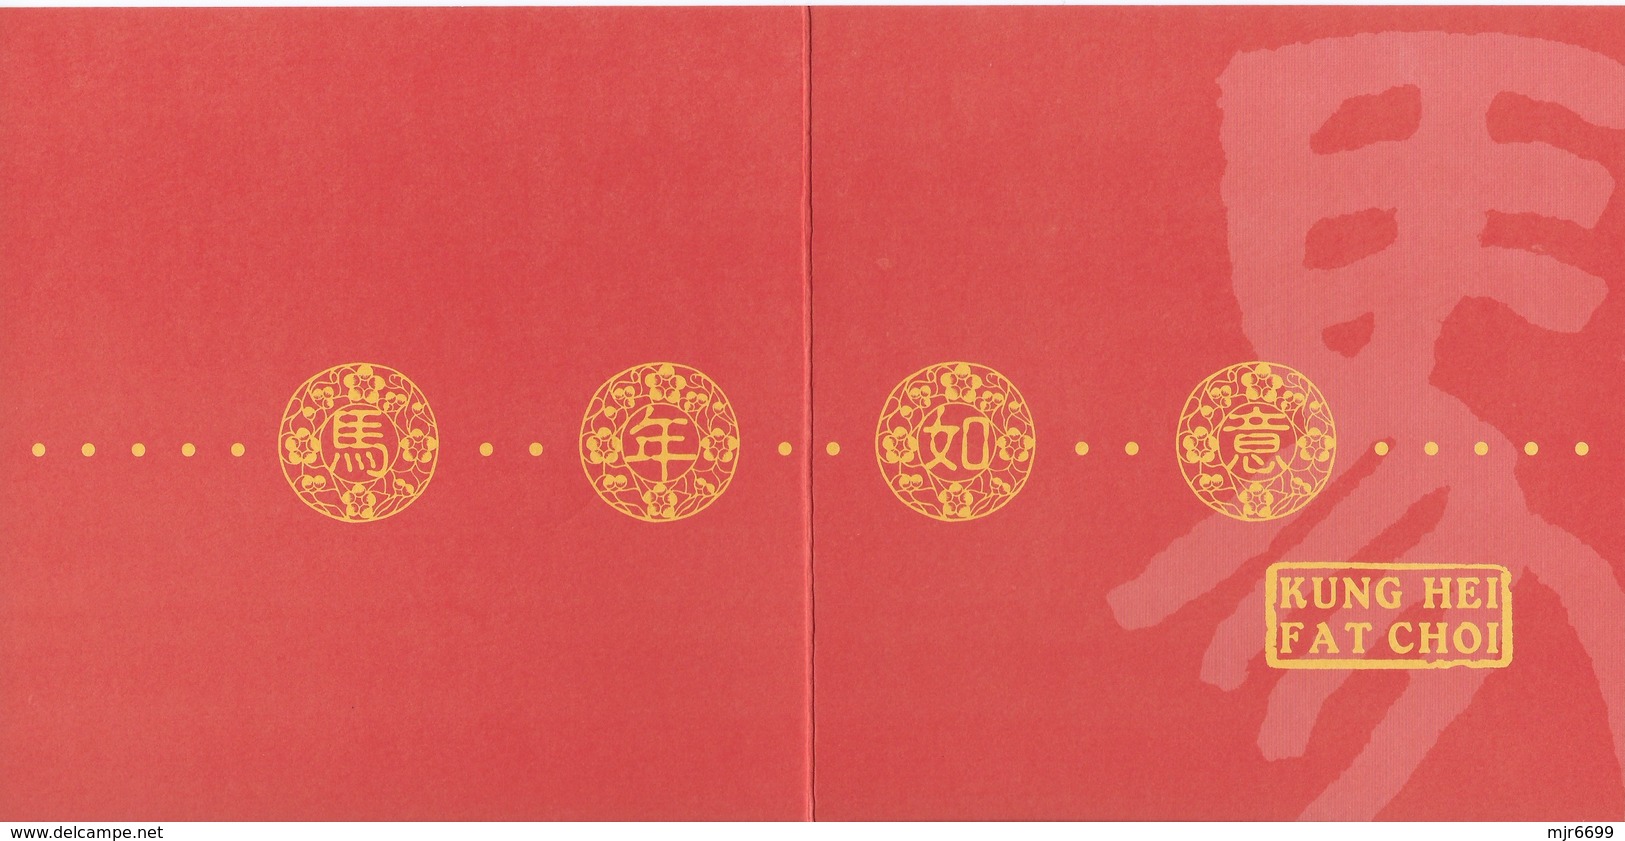 MACAU 2002 LUNAR NEW YEAR OF THE HORSE GREETING CARD & POSTAGE PAID COVER,  POST OFFICE CODE #BPD003 - Postal Stationery